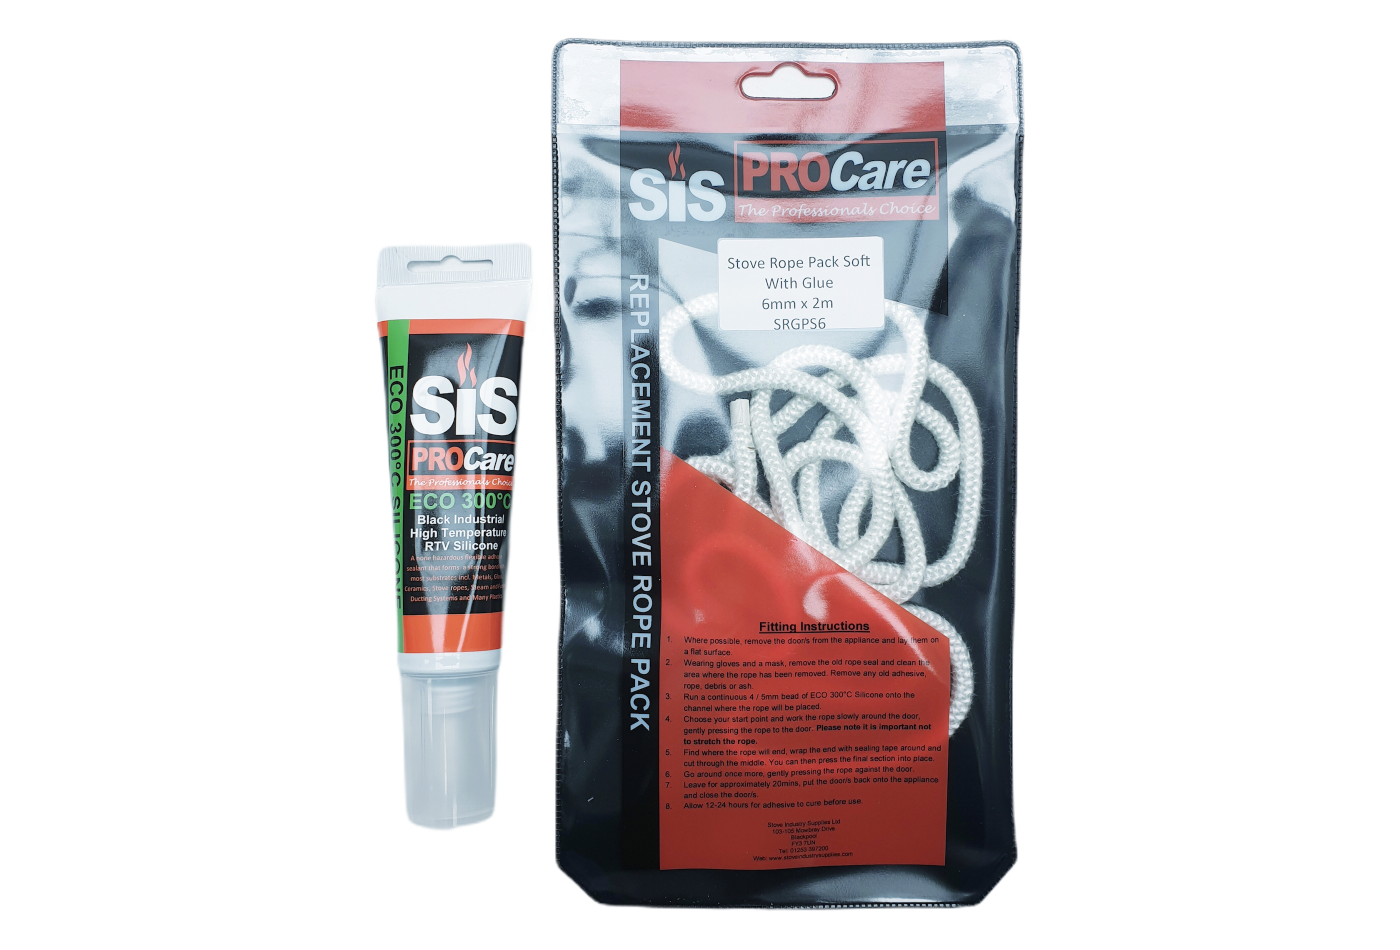 SiS Procare White 6 milimetre x 2 metre Soft Stove Rope & 80 millilitre Rope Glue Pack - product code SRGPS6